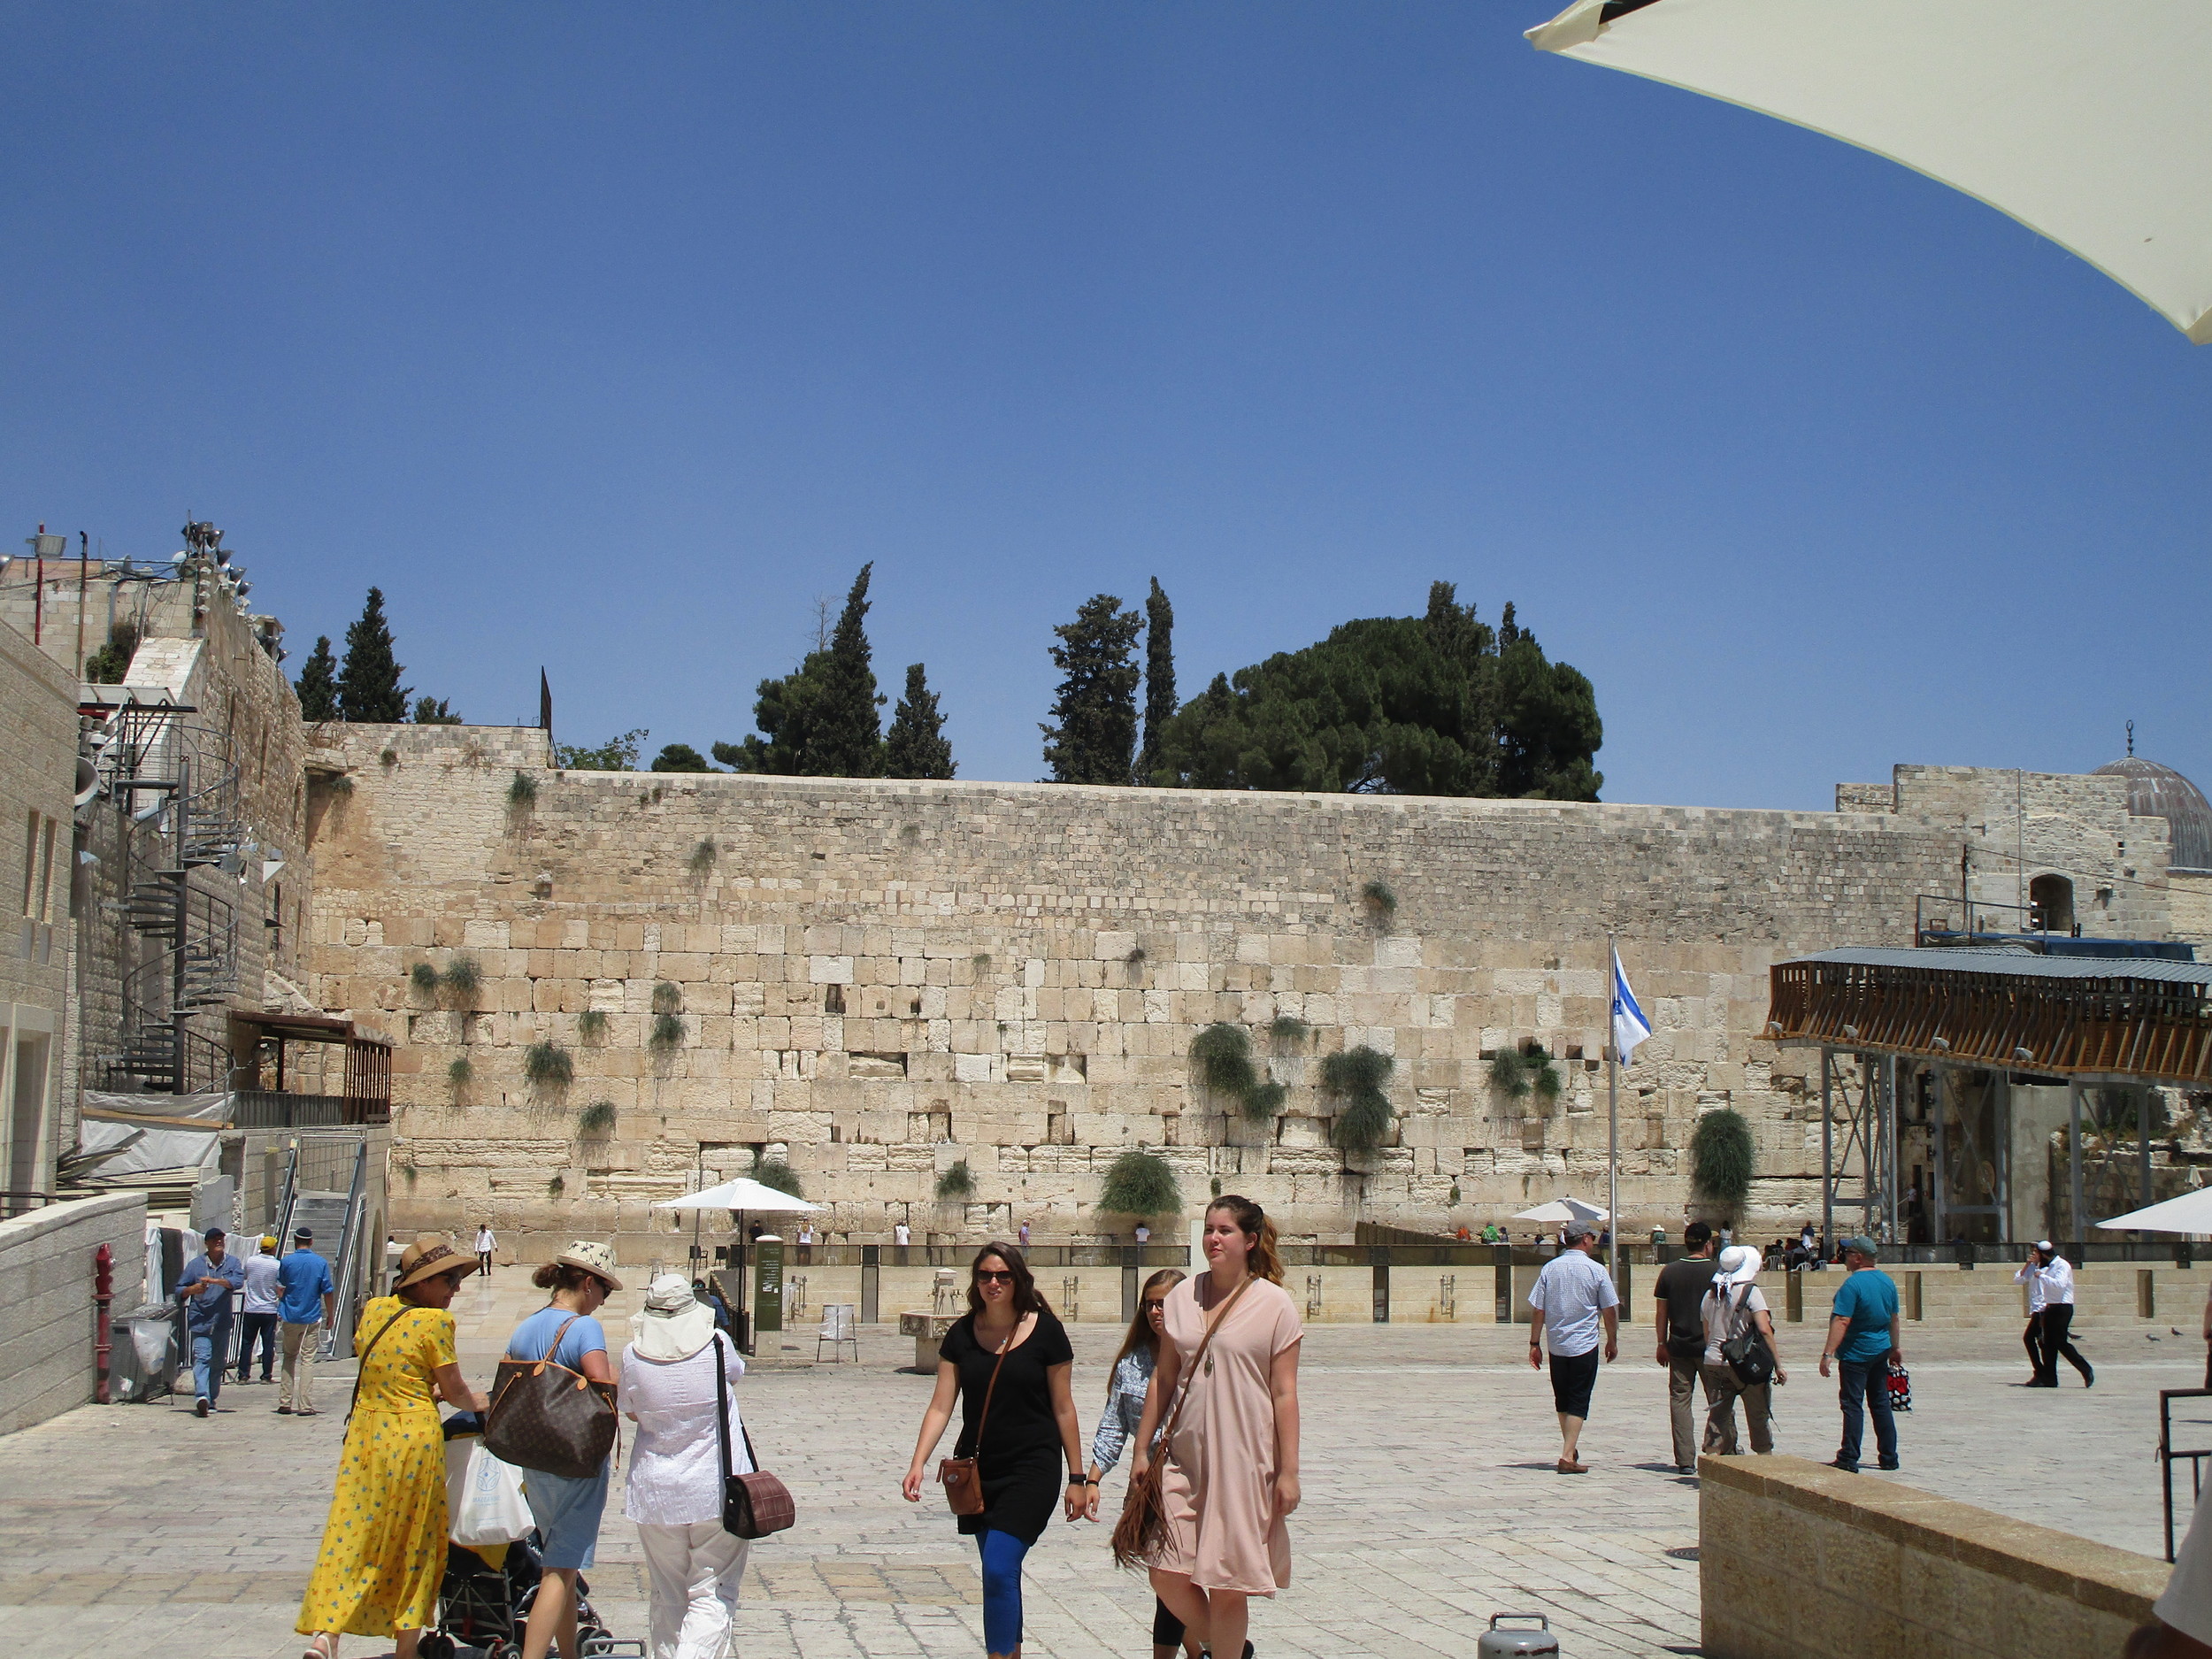  Traditionally known as the Wailing Wall. (Currently, this is called "The Western Wall".) 